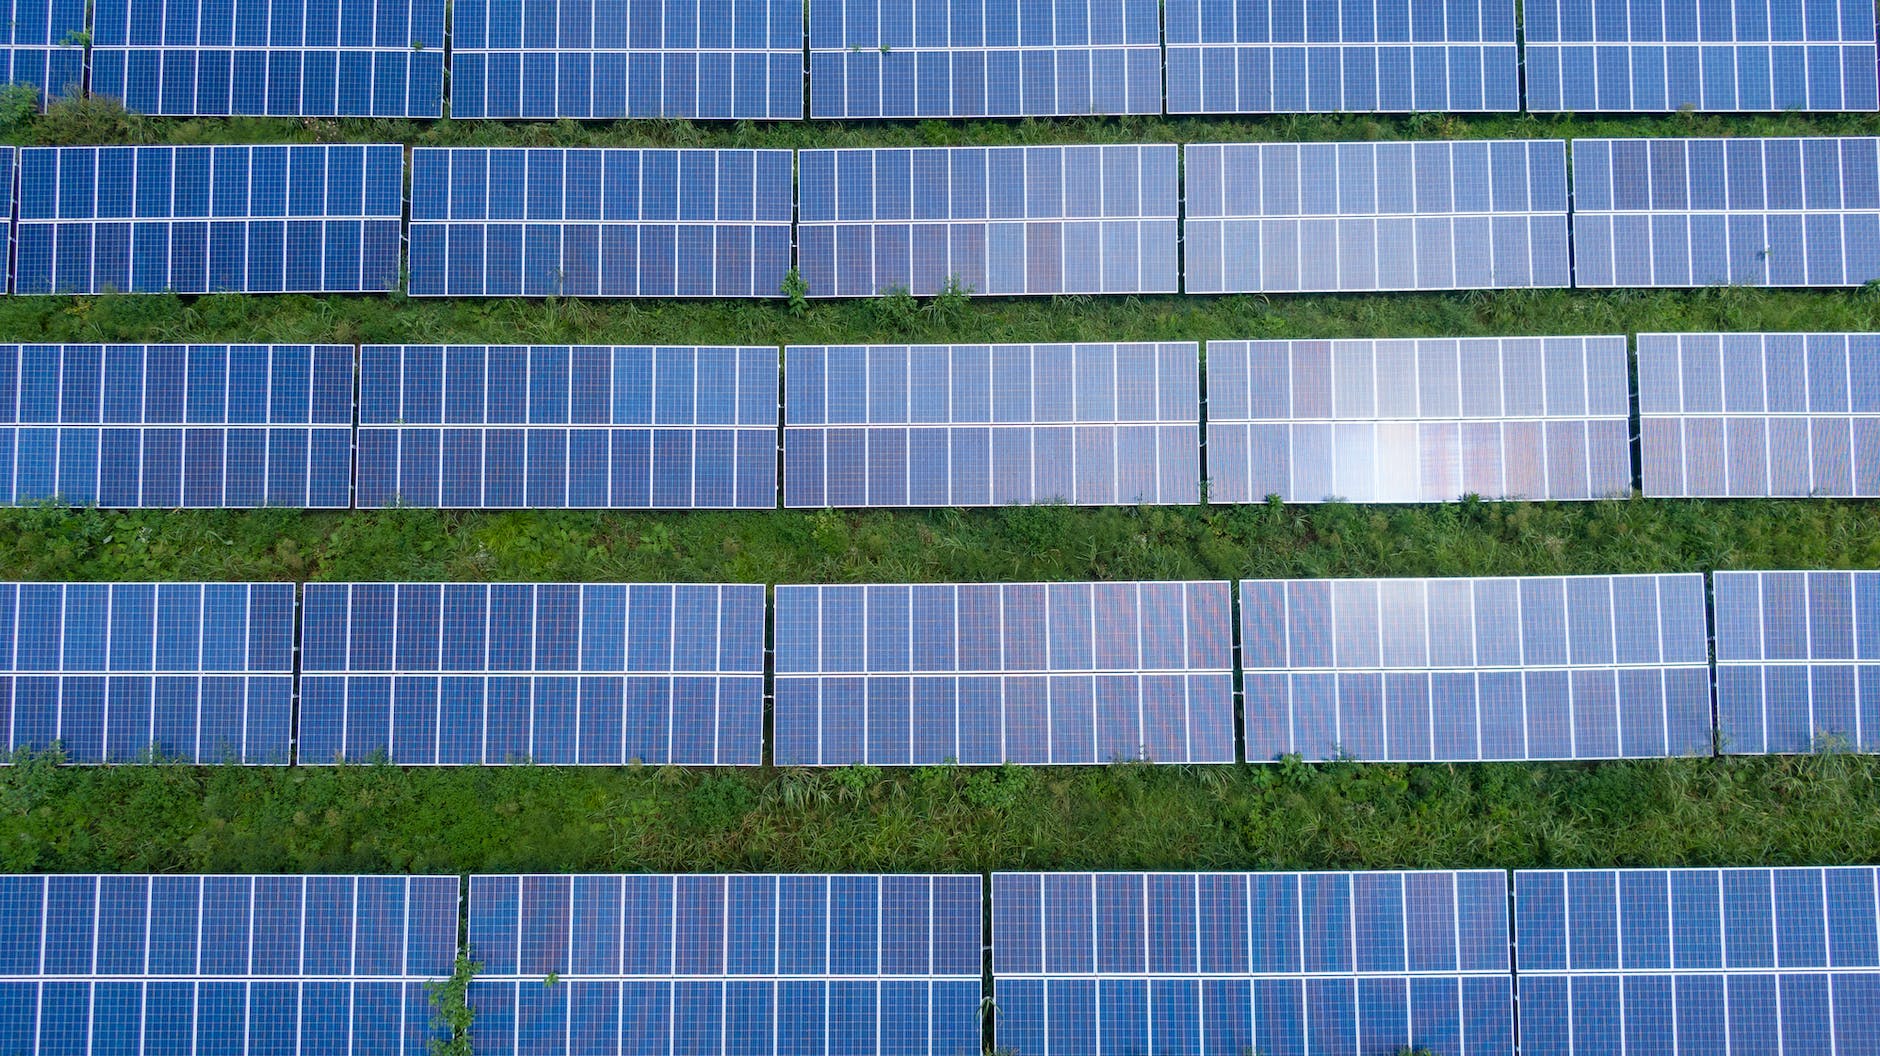 Two rows of solar panels on green grass